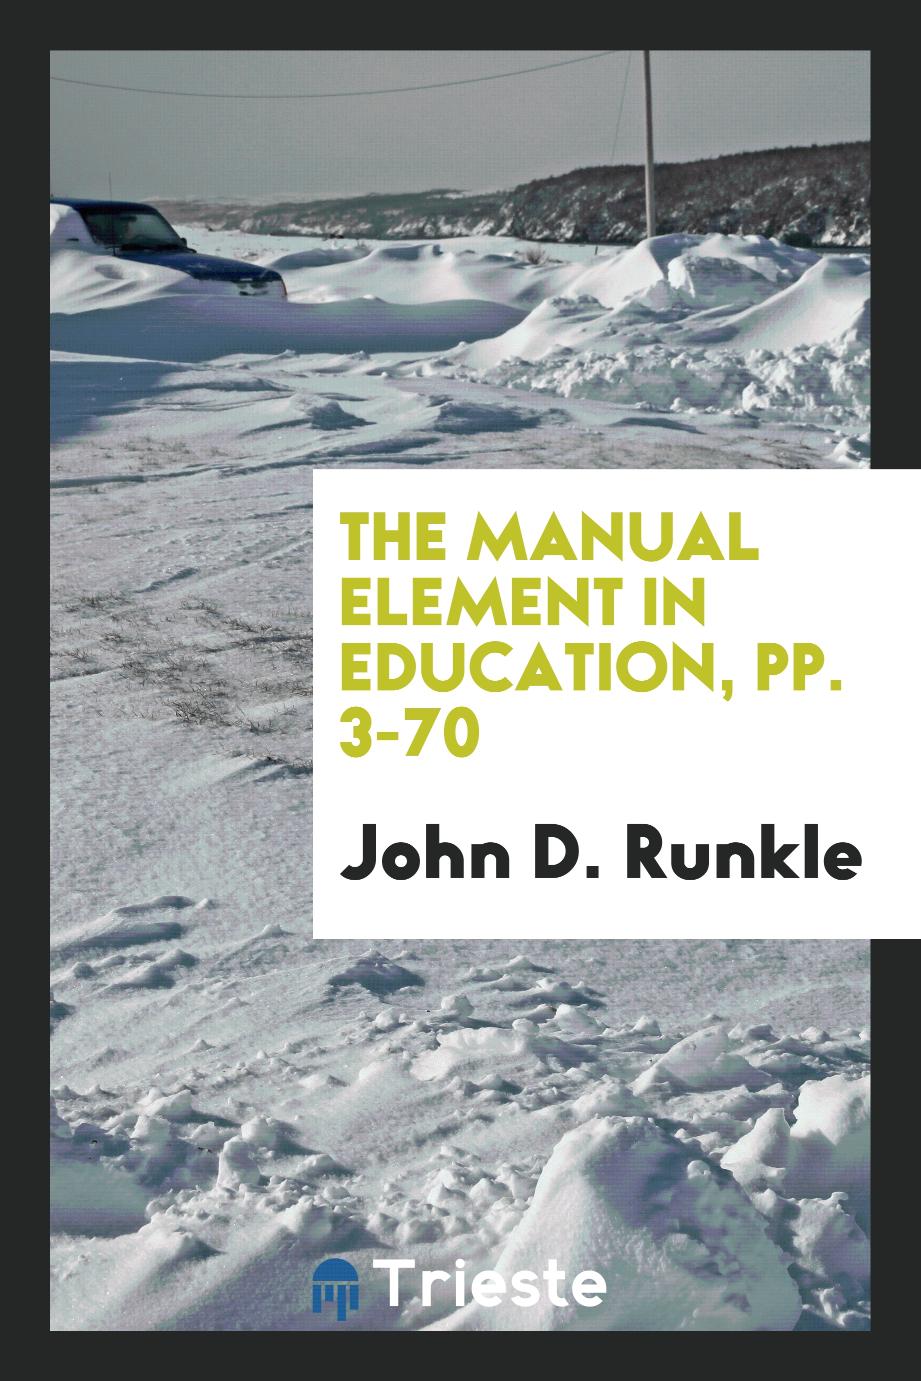 The Manual Element in Education, pp. 3-70